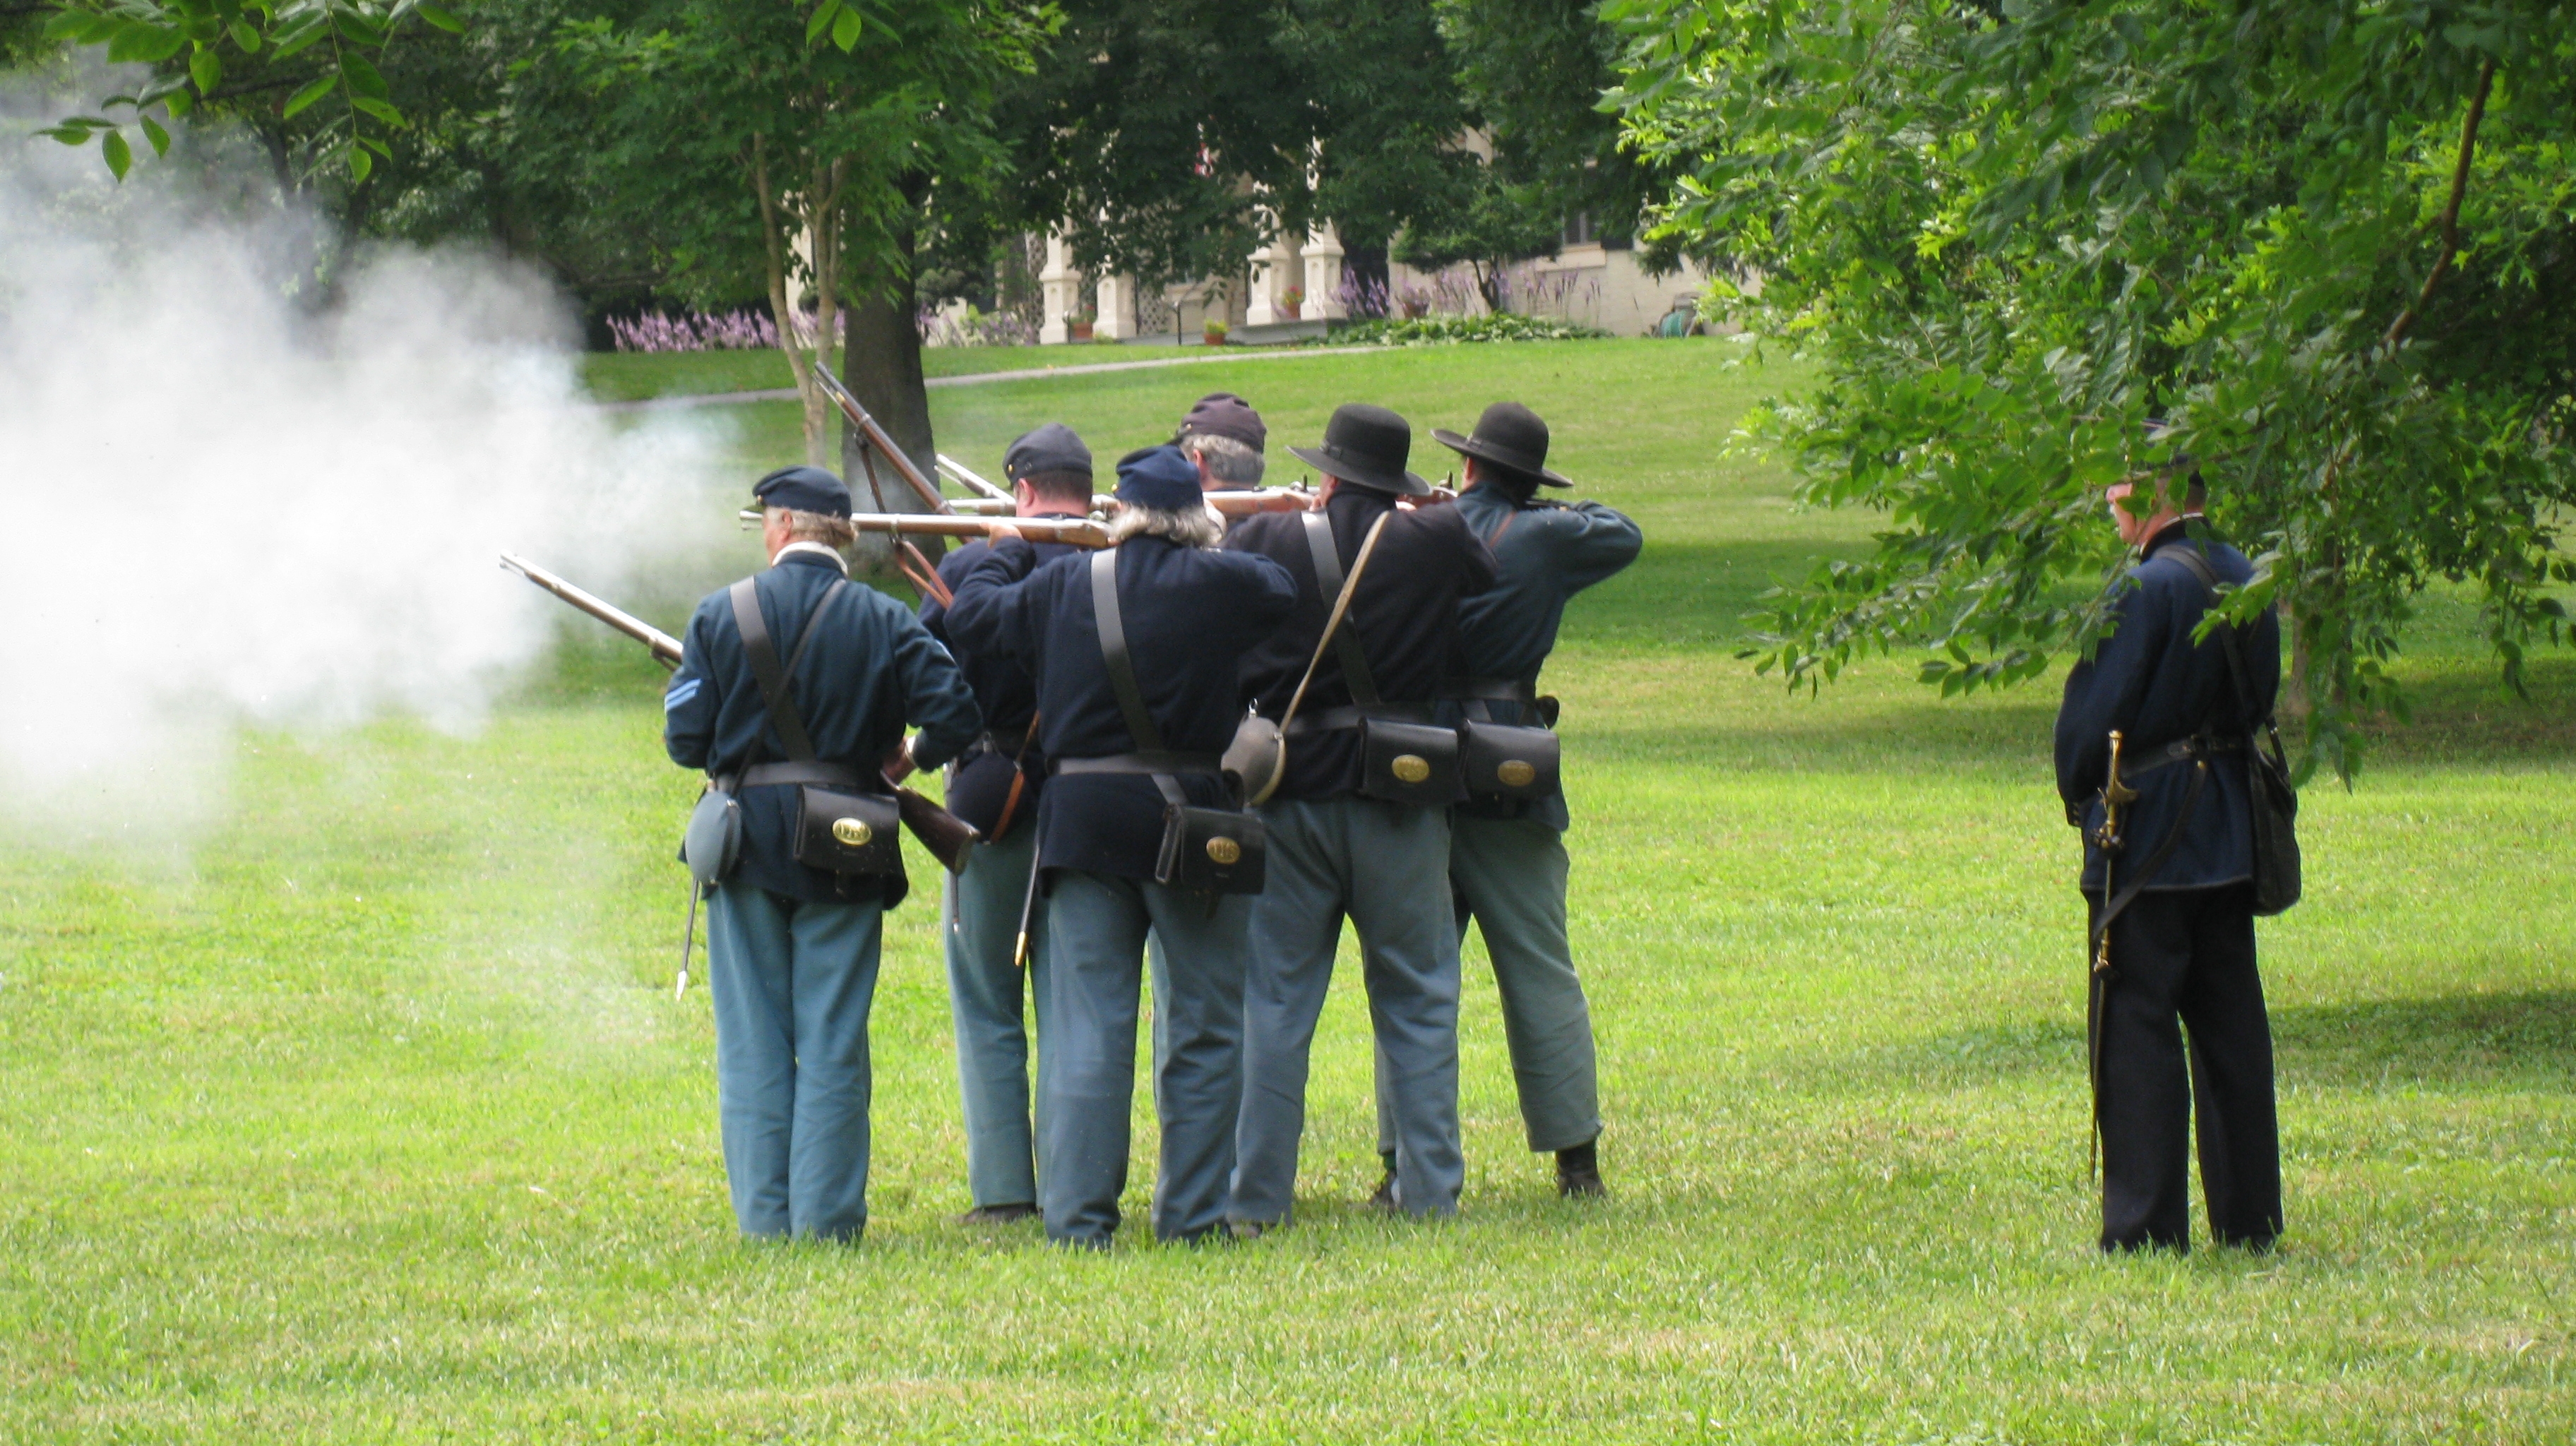 Six men in Civil War Union Army uniforms fire rifles while another man in uniform stands behind them.